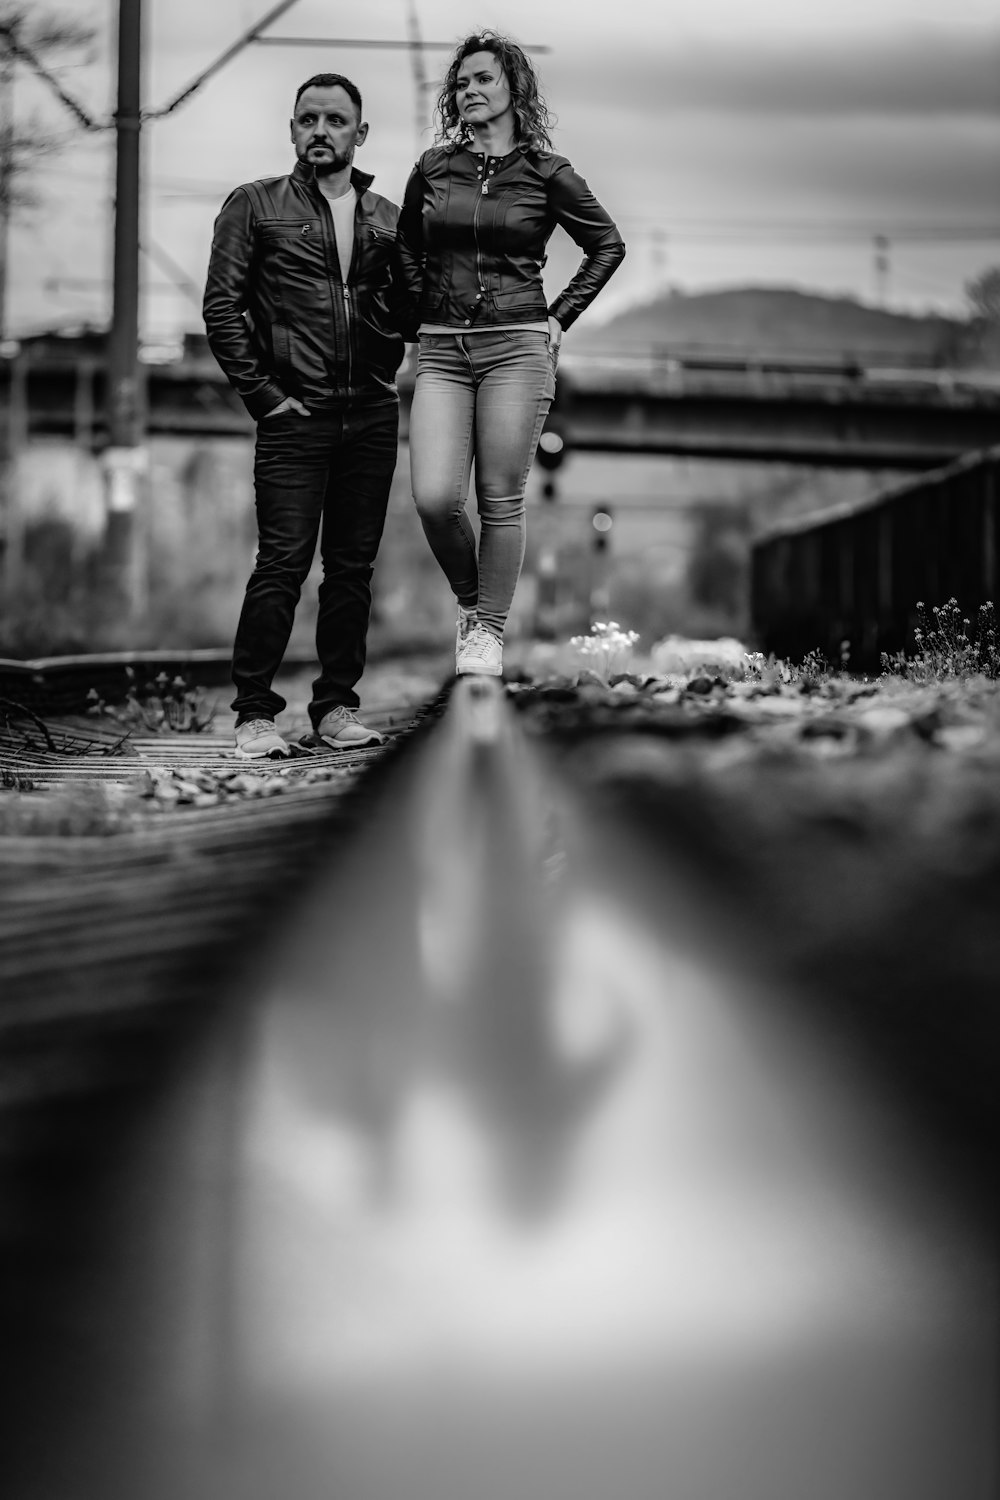 a man and a woman standing on a train track